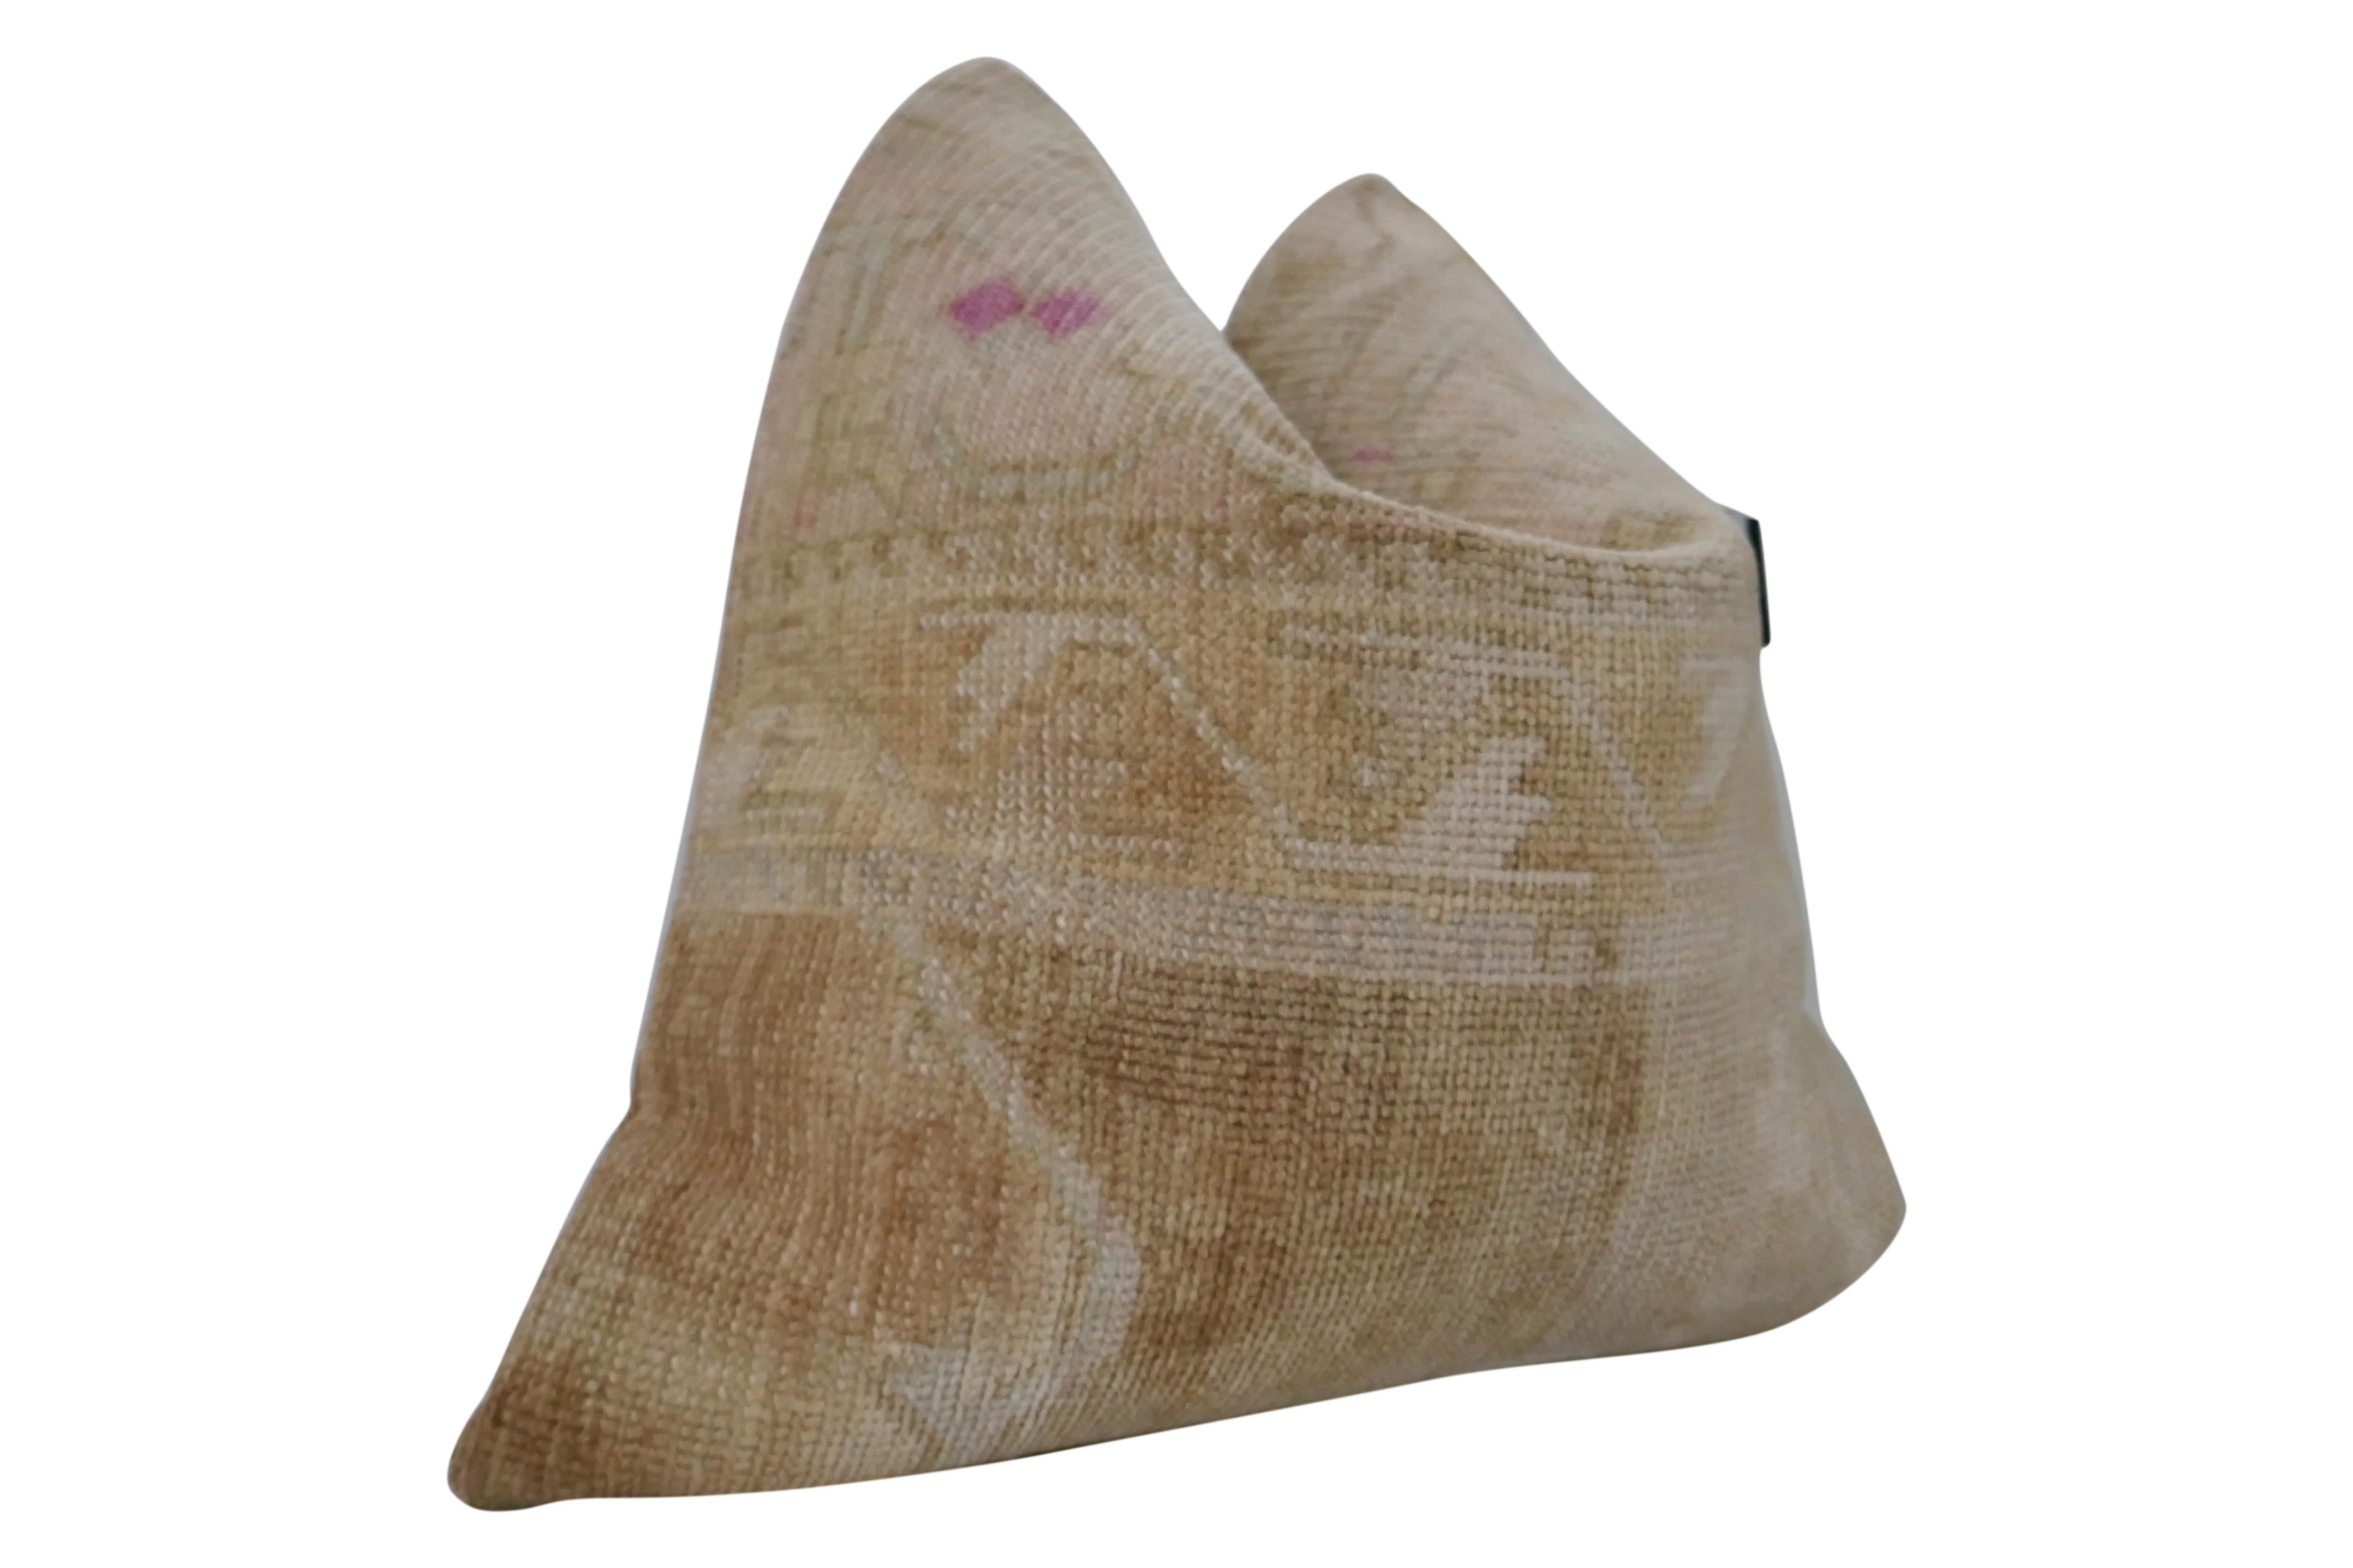 Fragments Identity authentic vintage Anatolian Kilim wool large pillow. Beautiful art of textile, hand-woven from pure wool into a heavy textural, intricately patterned motif creating amazing tone & texture. These prized collected textiles are truly